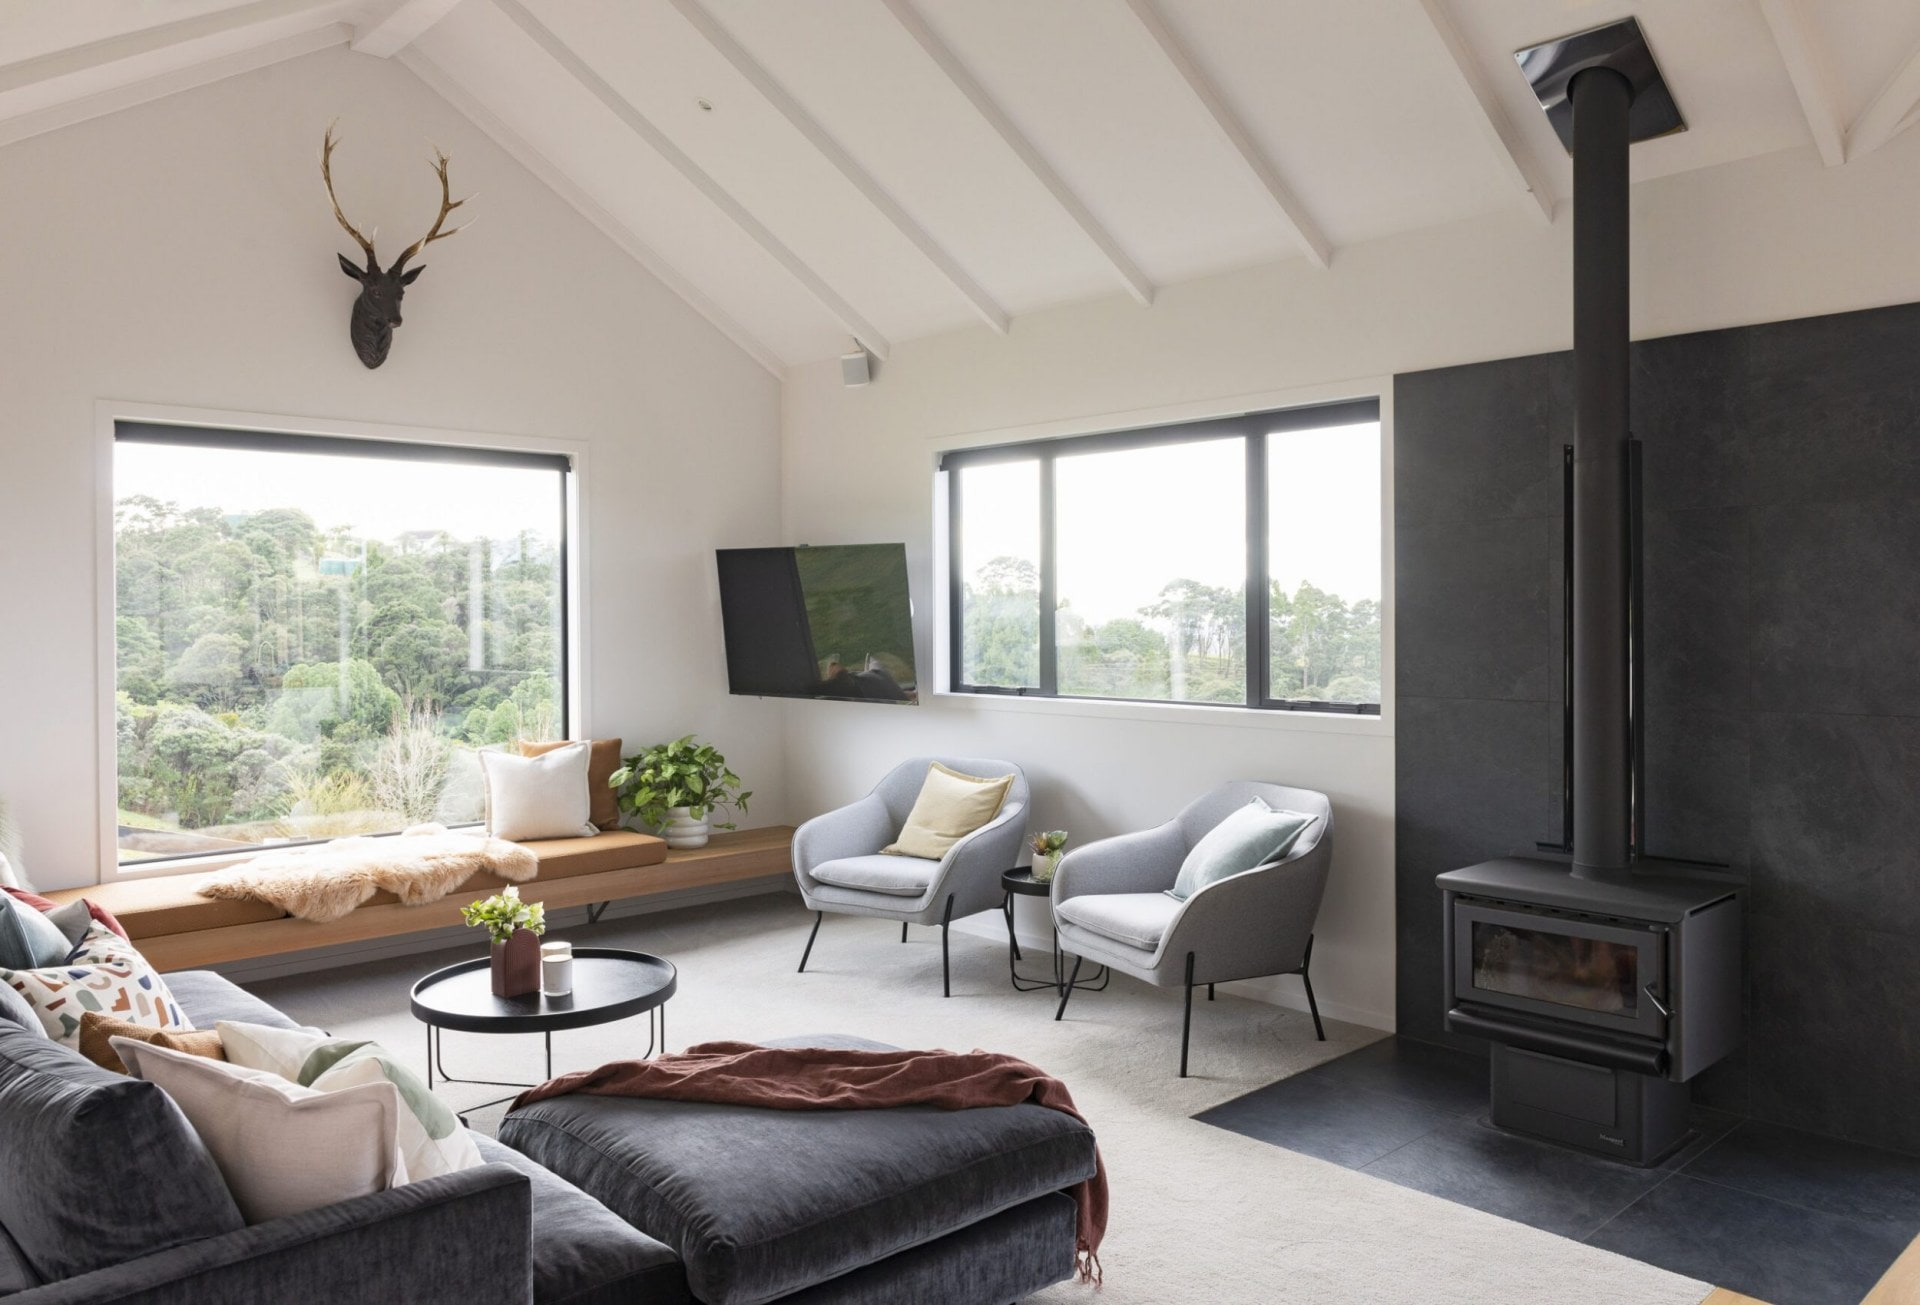 Living room with grey couches and chair, fire place and window seat